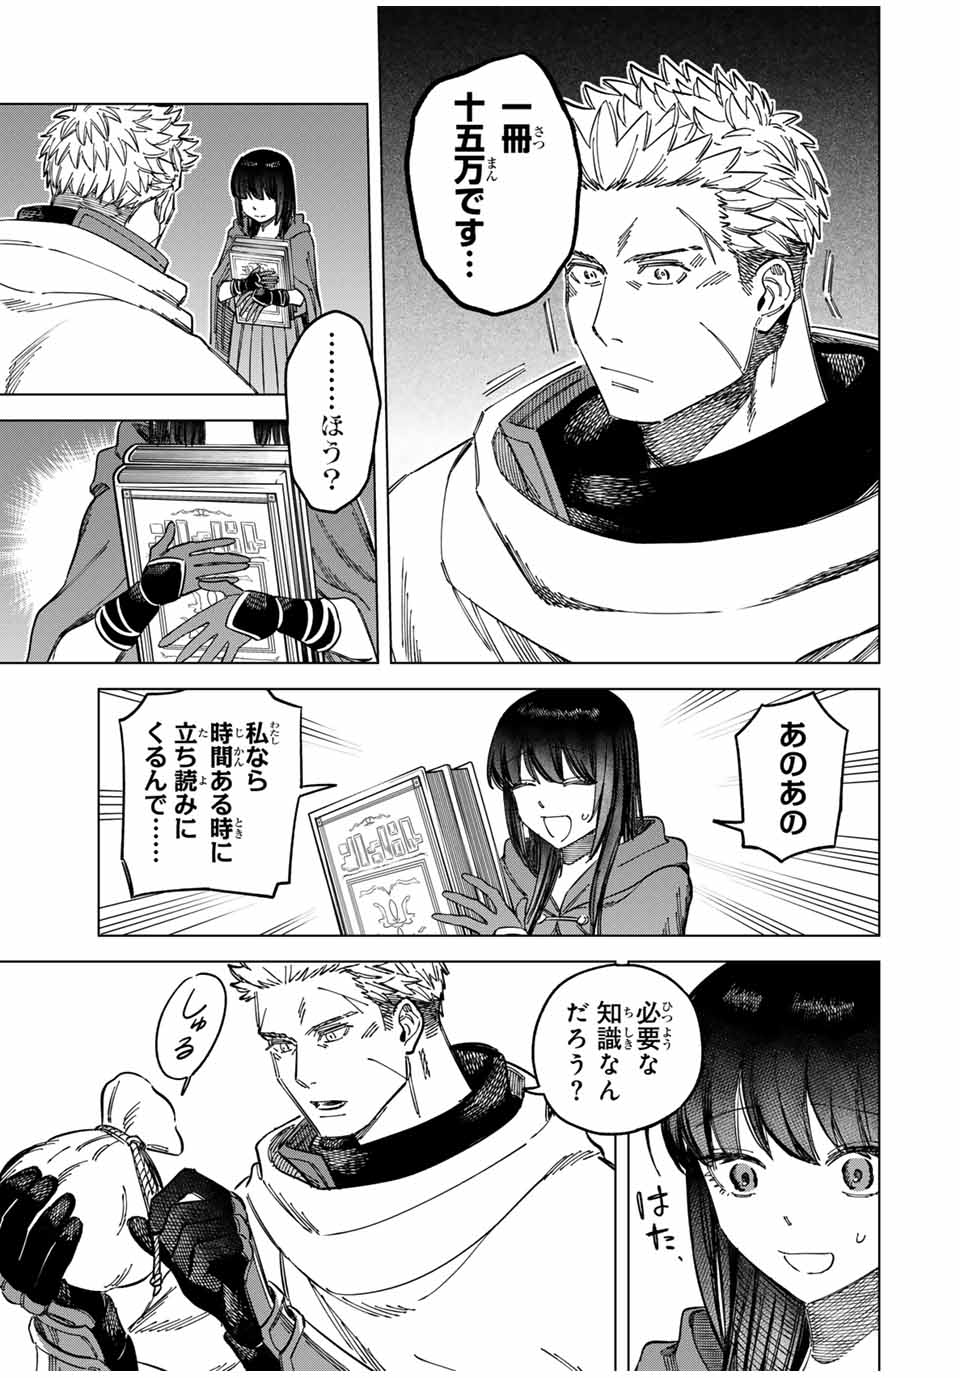 Witch and Mercenary 魔女と傭兵 第5.1話 - Page 11